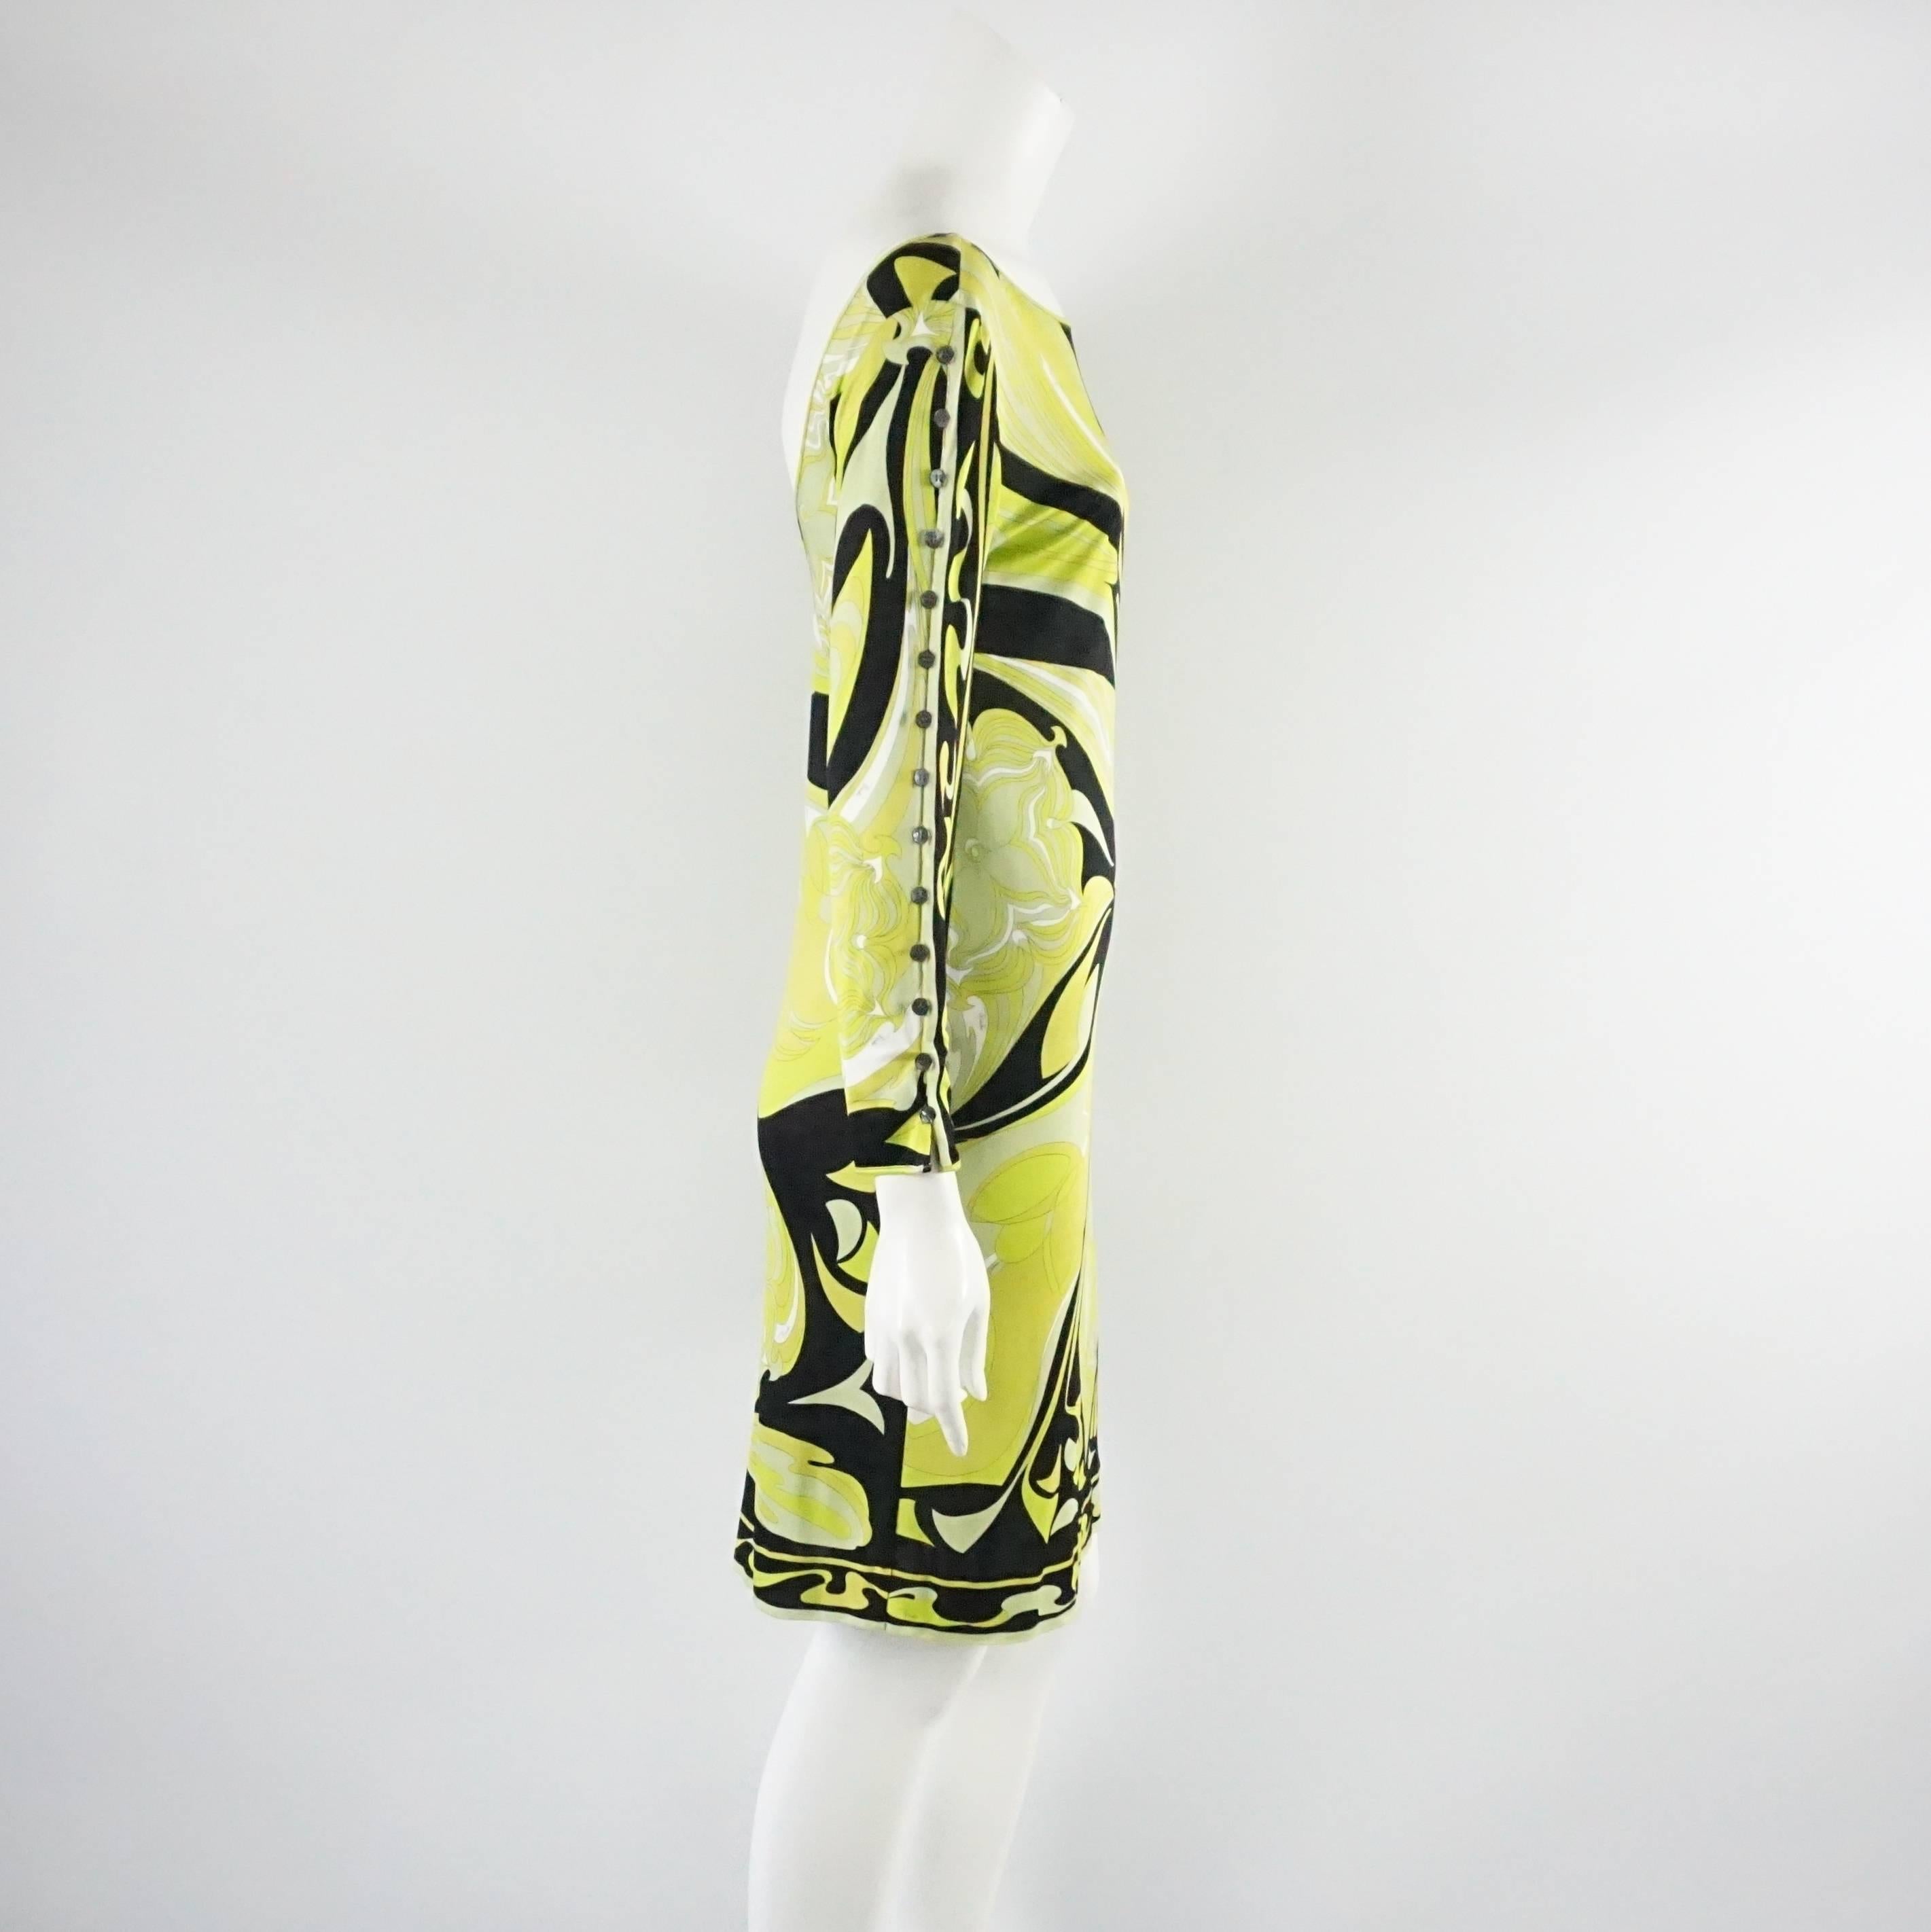 This Emilio Pucci dress has a lime green, chartreuse, and black floral print. It is also long sleeved with buttons going all down each arm and a lower cut back. The dress is in good condition with a few pulls and small discolorations as seen in the